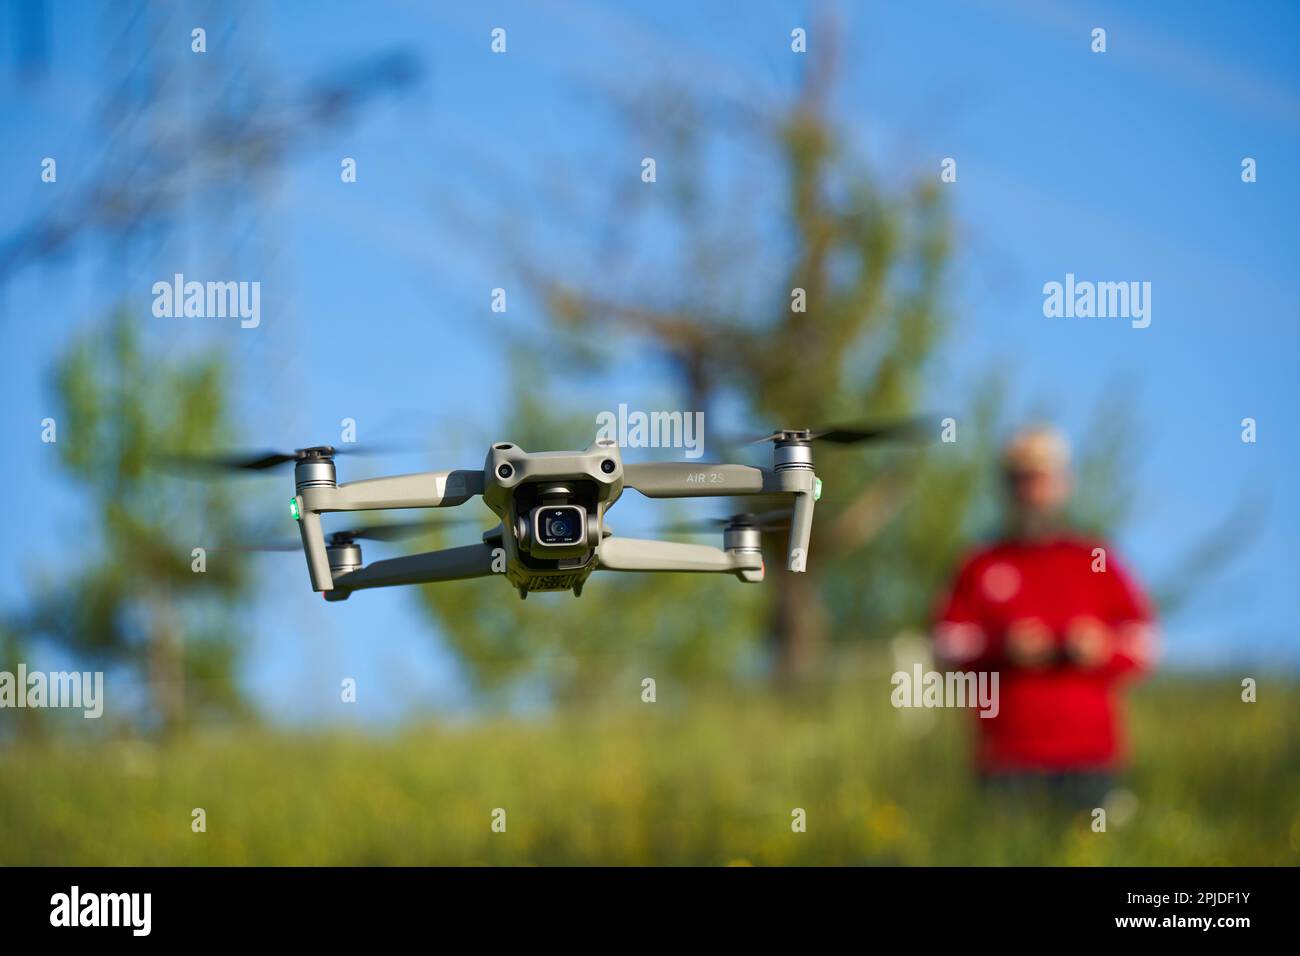 Nürtingen, Germany - May 29, 2021: Drone dji air 2s. The gray multicopter with lots of safety features delivers good photo and video quality. Trees an Stock Photo